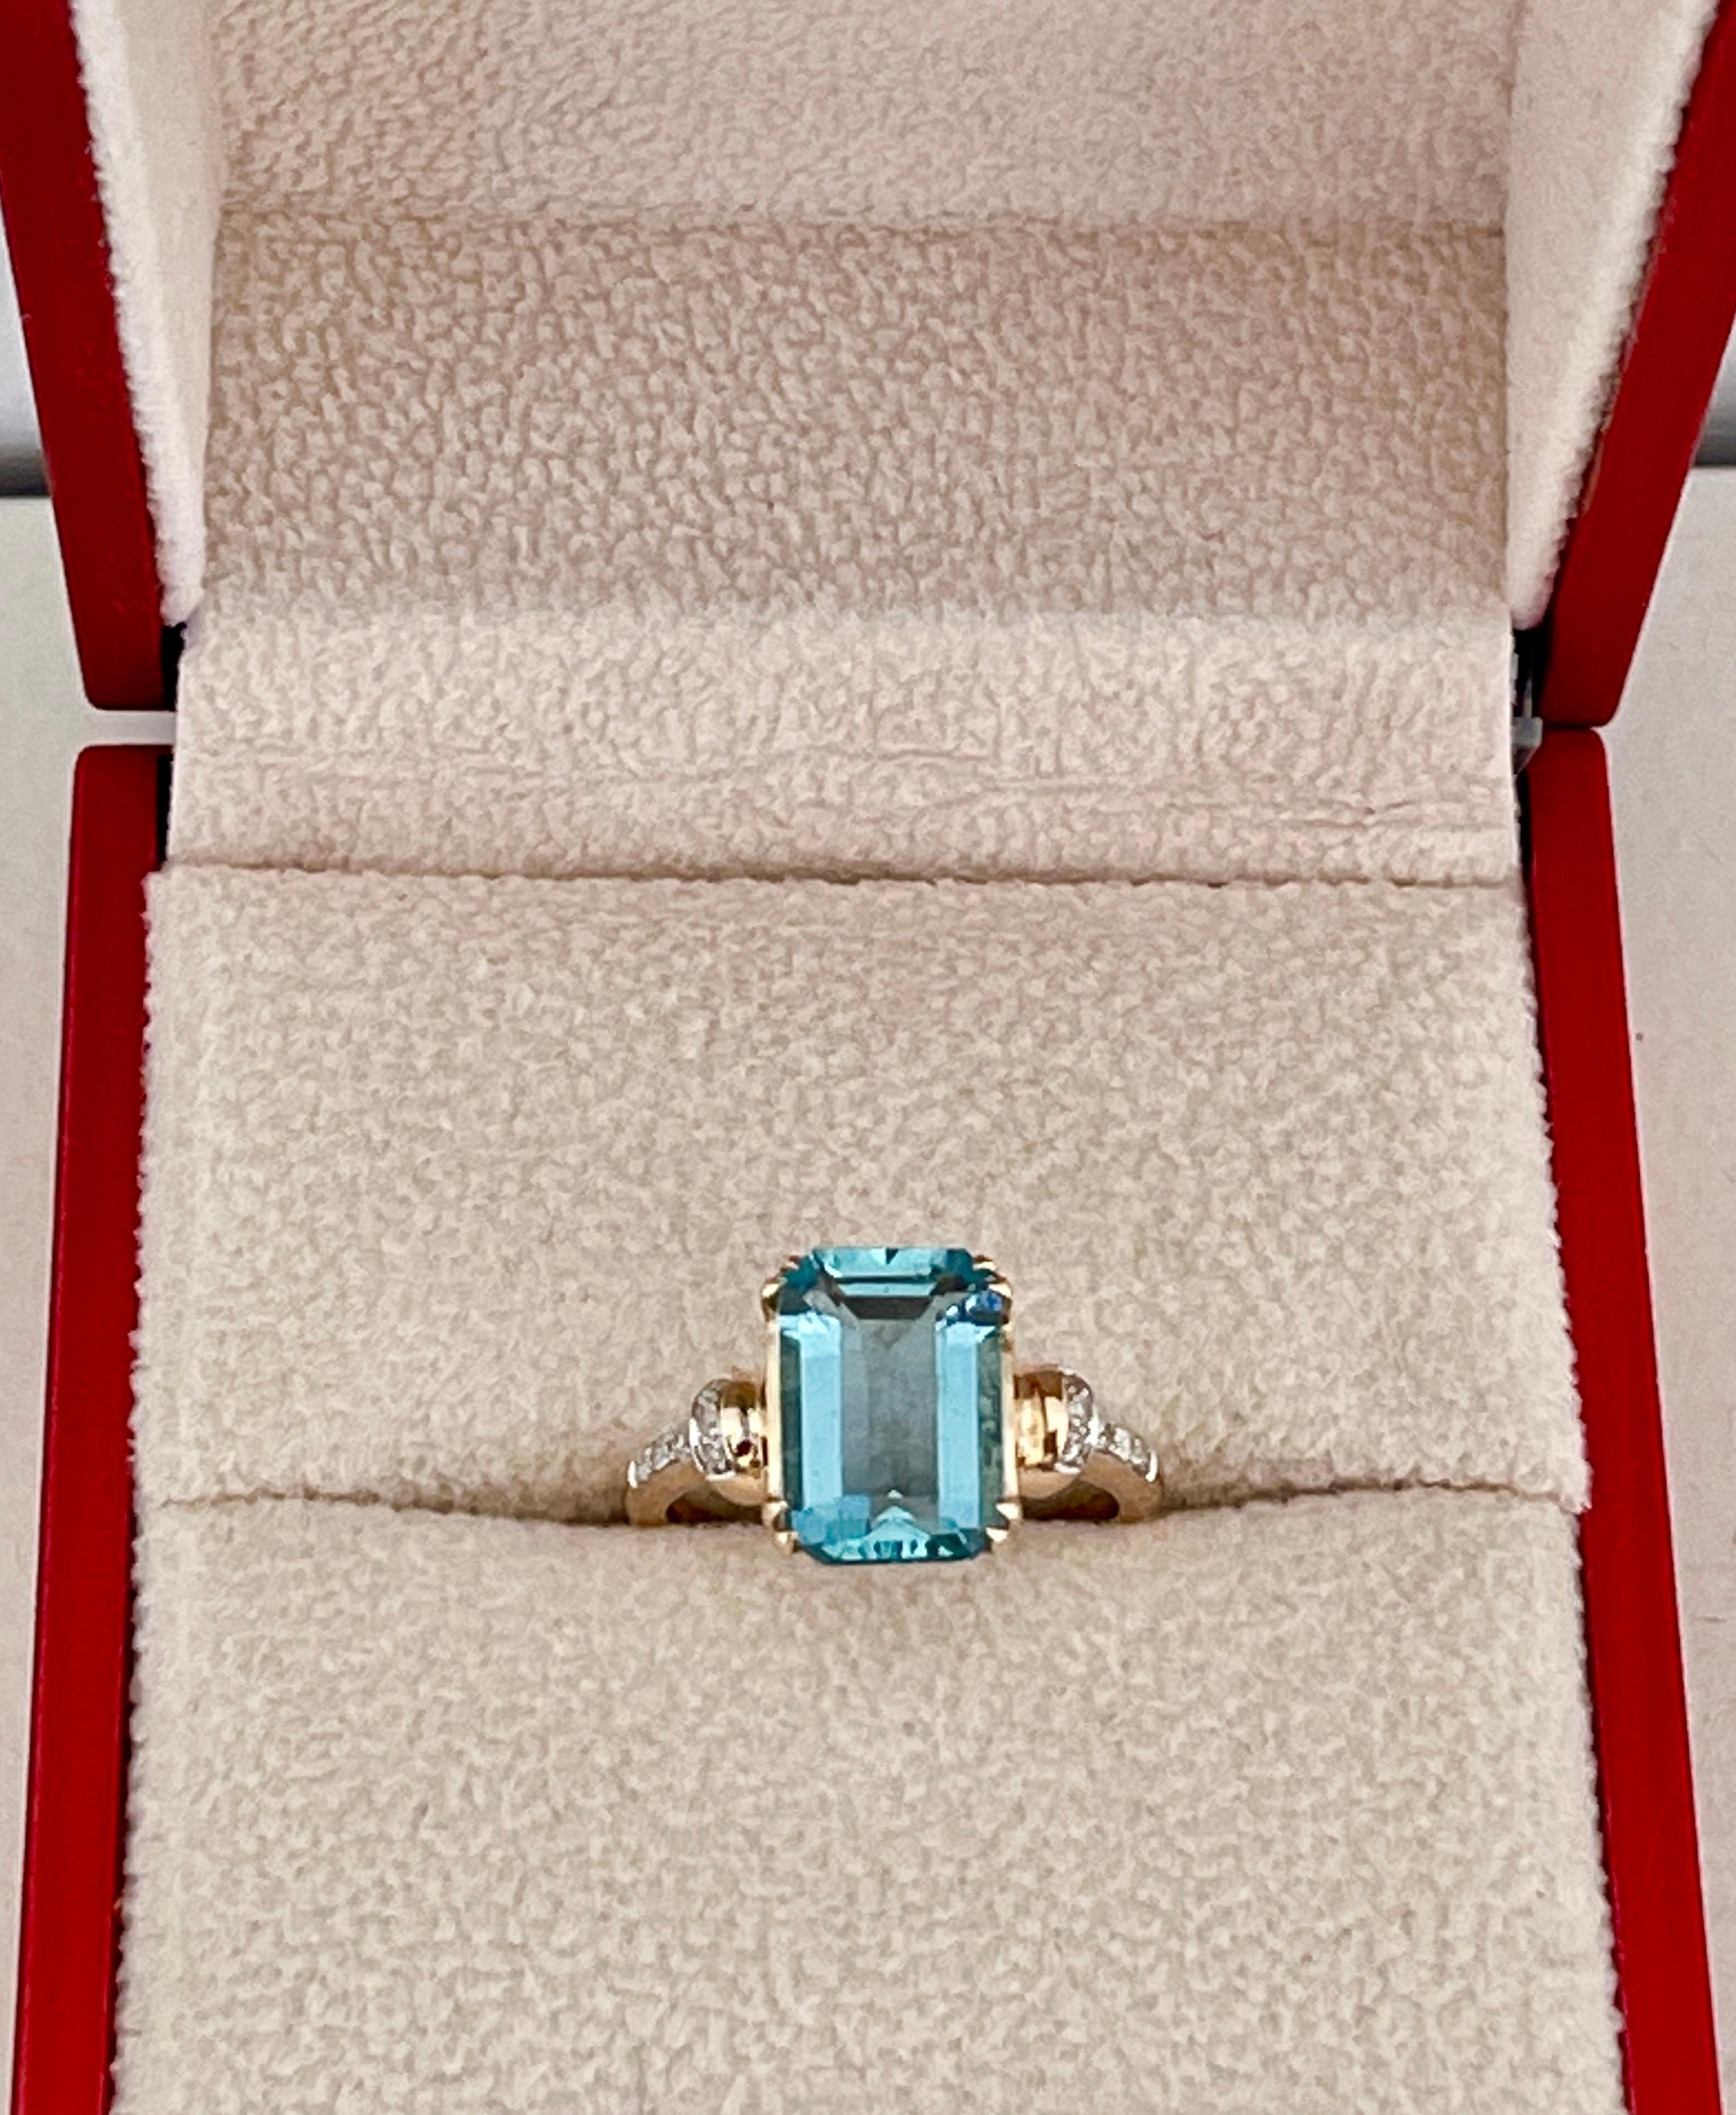 Vintage Santa Maria Aquamarine Diamond Ring 18ct Yellow Gold c1950s In Good Condition For Sale In Mona Vale, NSW